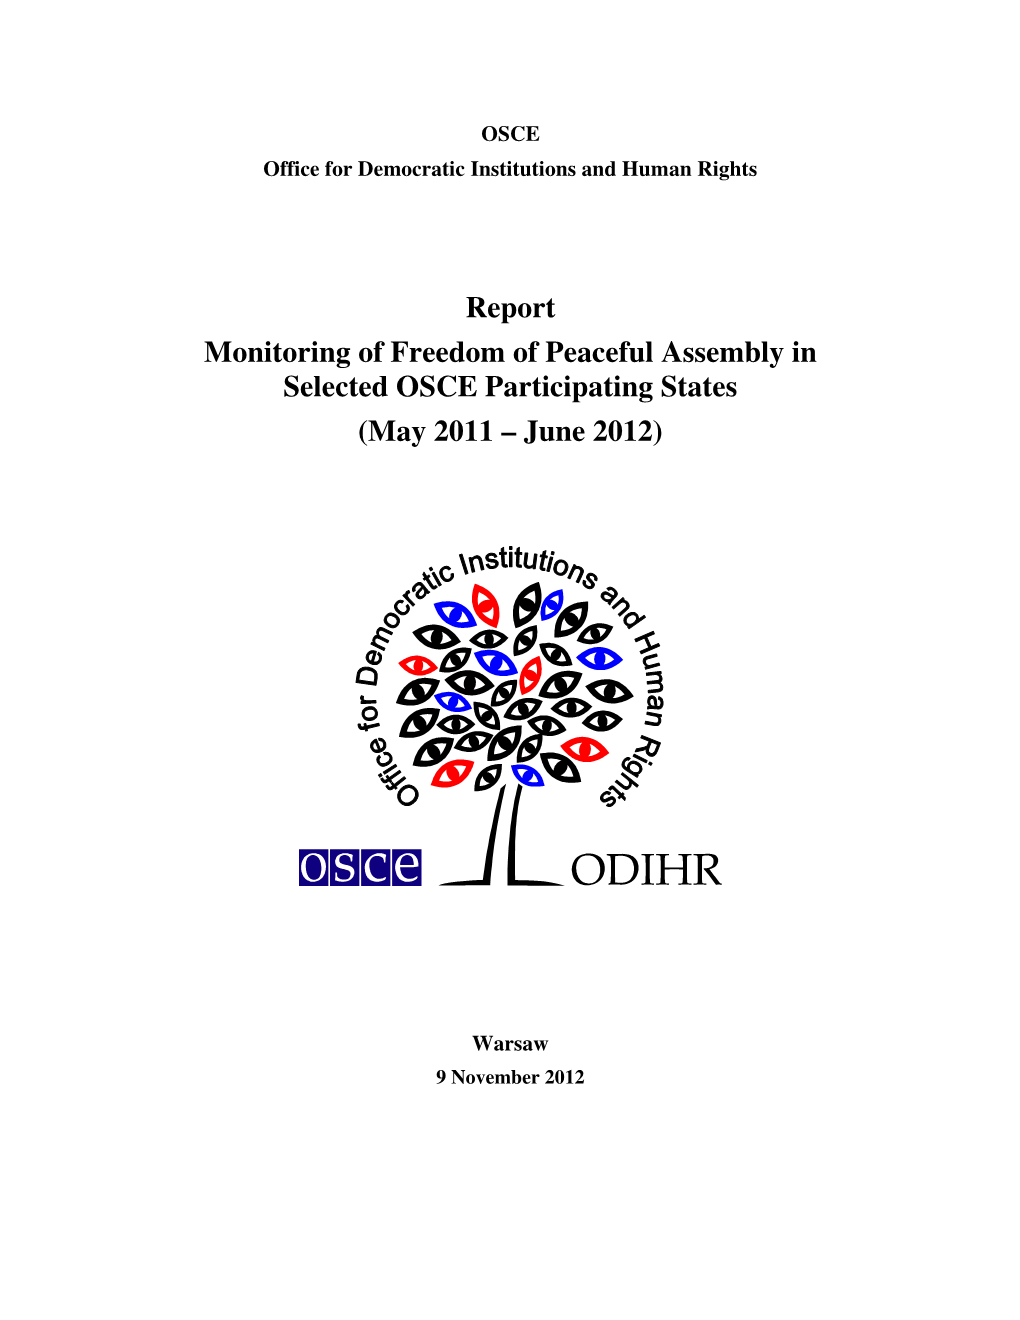 Report Monitoring of Freedom of Peaceful Assembly in Selected OSCE Participating States (May 2011 – June 2012)